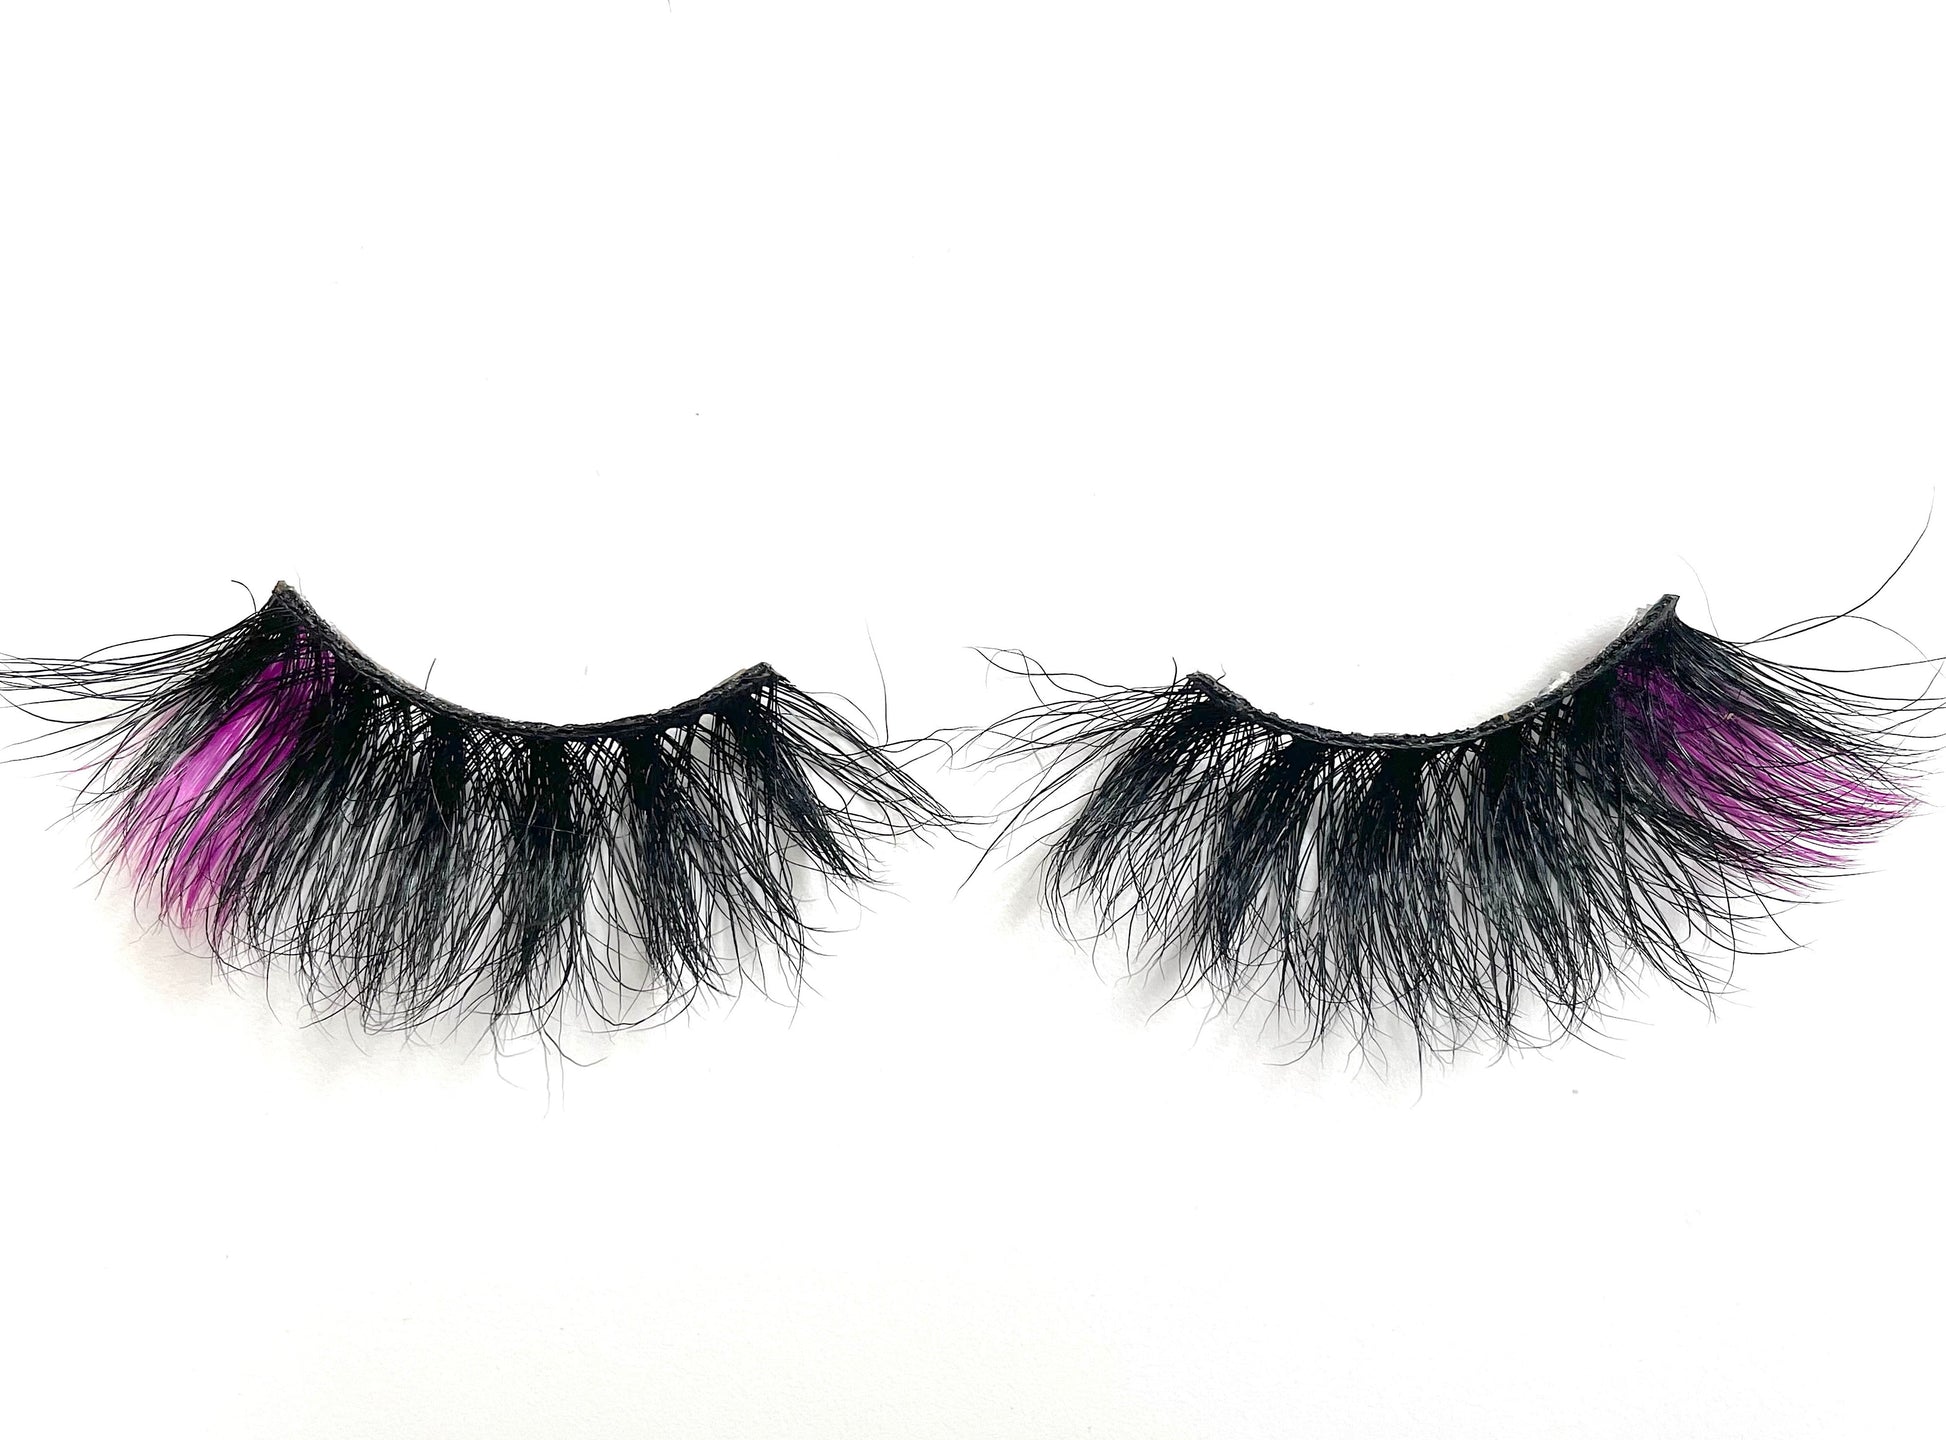 These 5D premium mink lashes are 25mm in length. They are soft, lightweight, and comfortable to wear on the lids. The subtle pop of violet on the outer corner adds playfulness to your eyes. The flexible cotton lash band, makes the application process a breeze. 